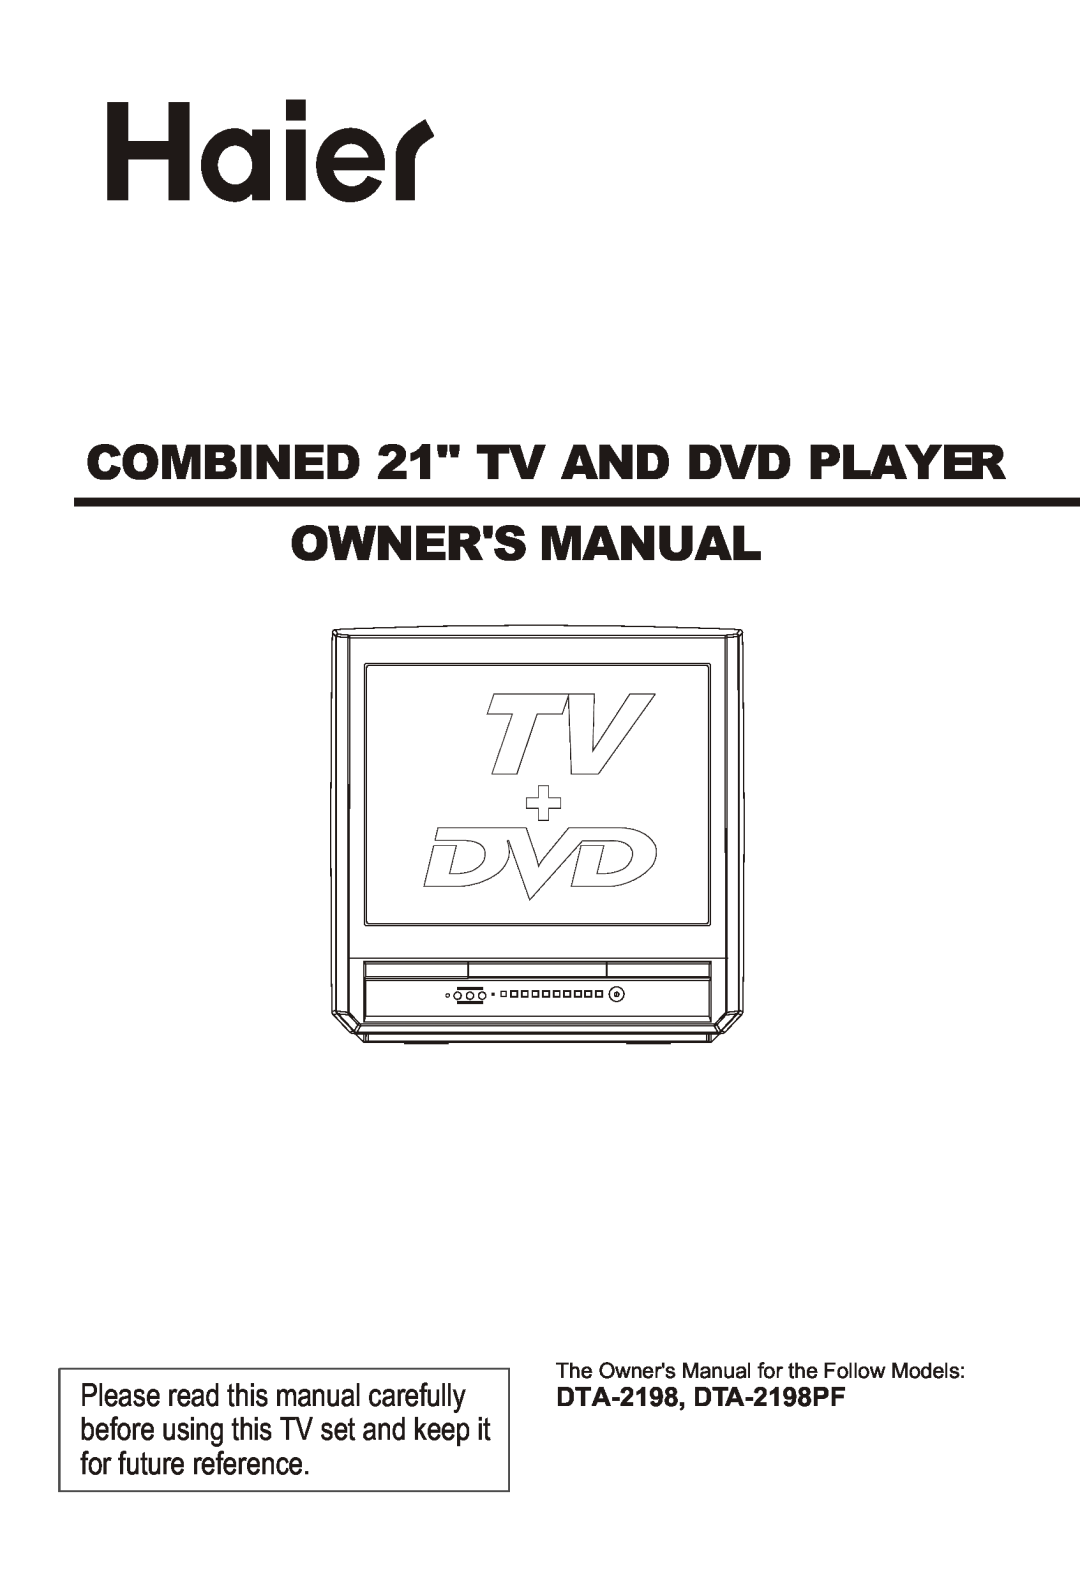 Haier owner manual DTA-2198, DTA-2198PF, COMBINED 21 TV AND DVD PLAYER OWNERS MANUAL 